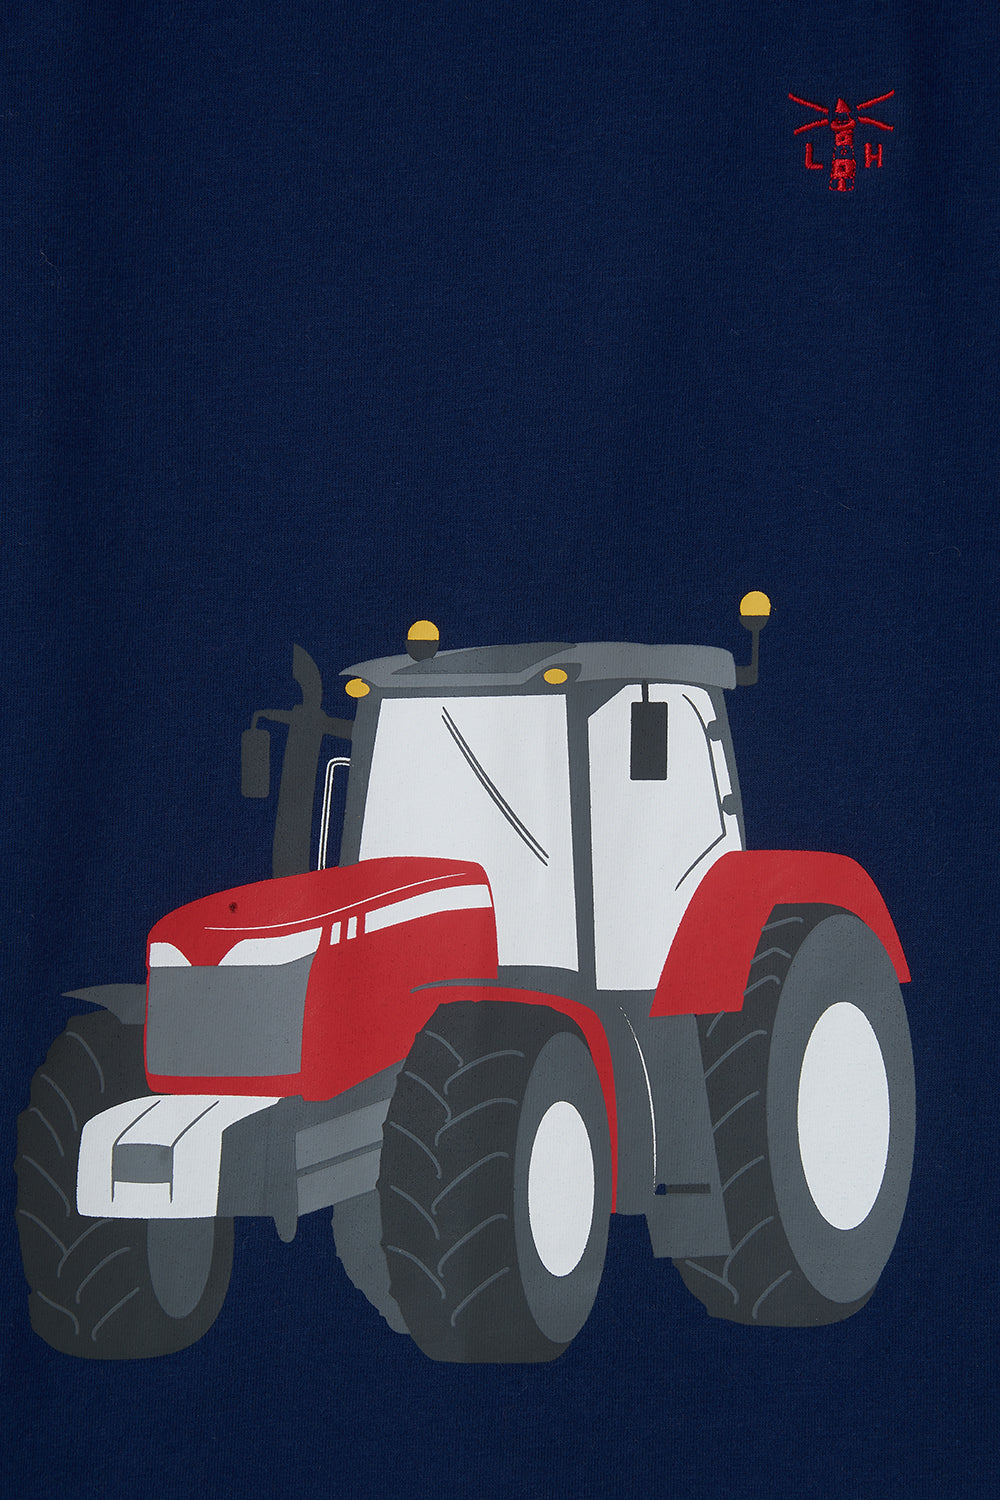 Lighthouse Mason T-shirt - Red Tractor